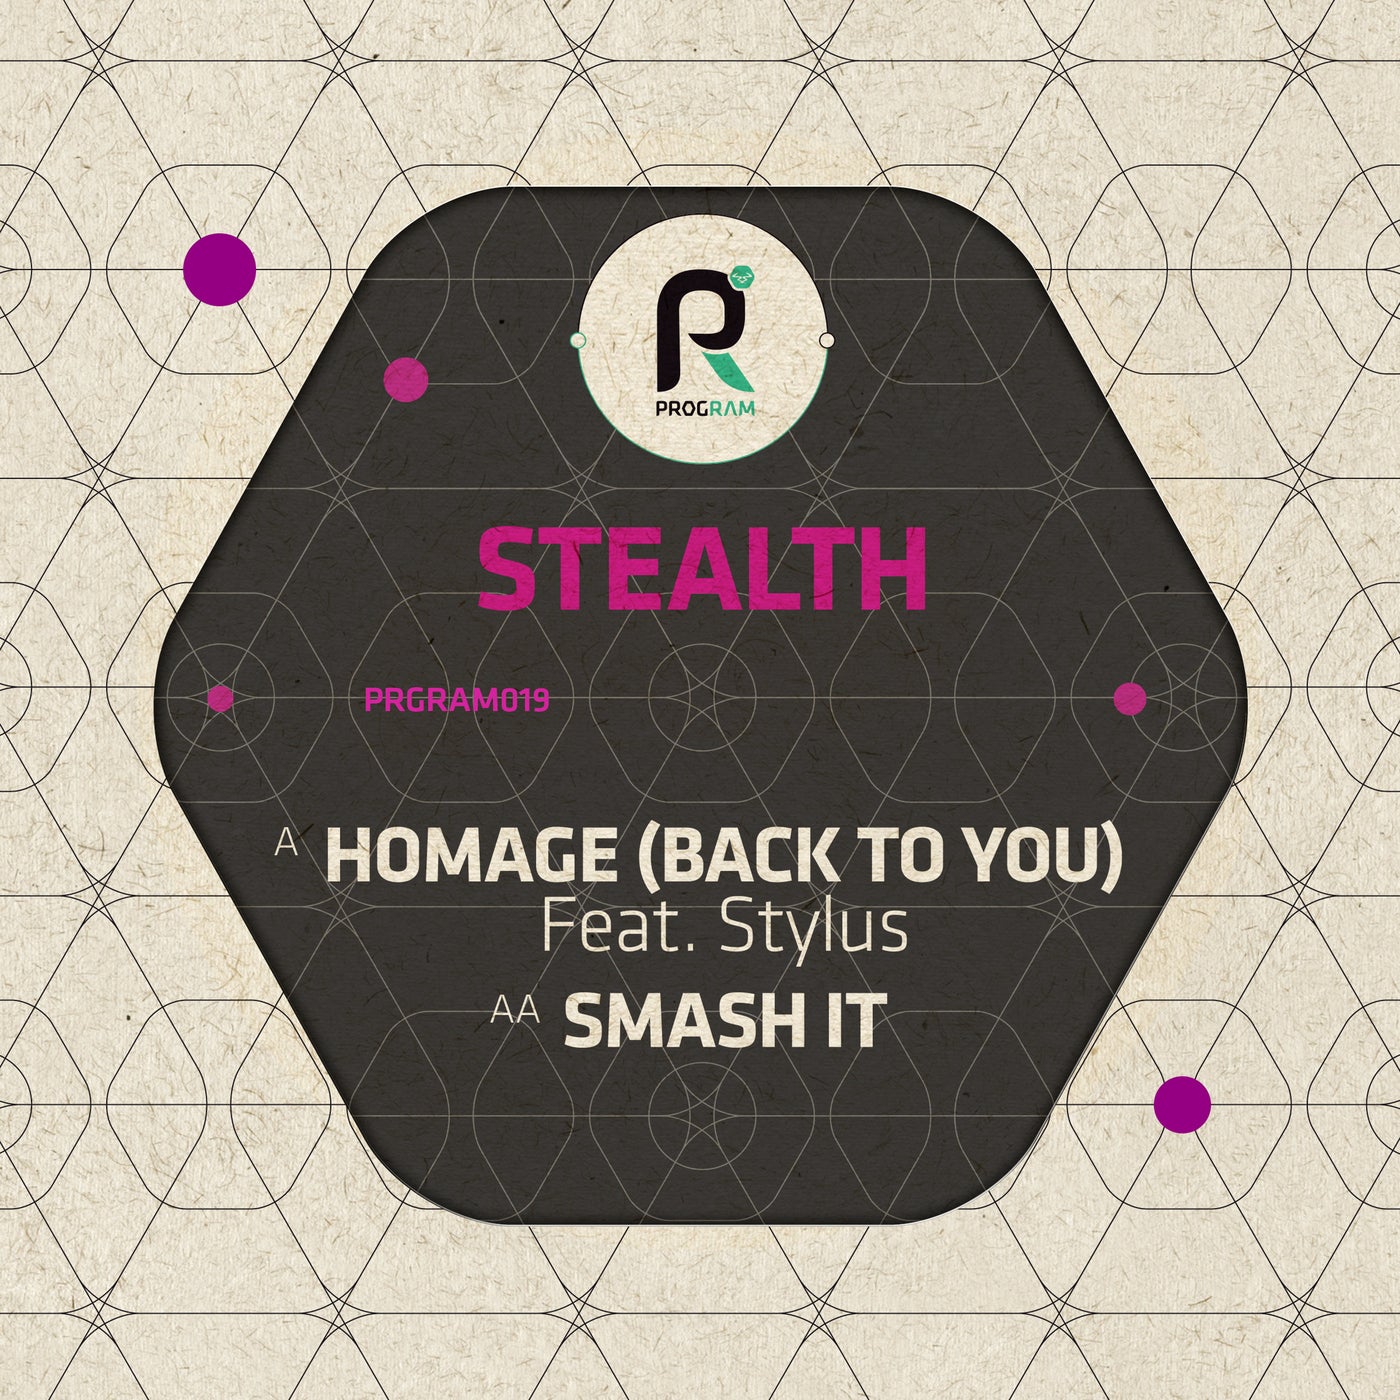 Homage (Back to You) / Smash It